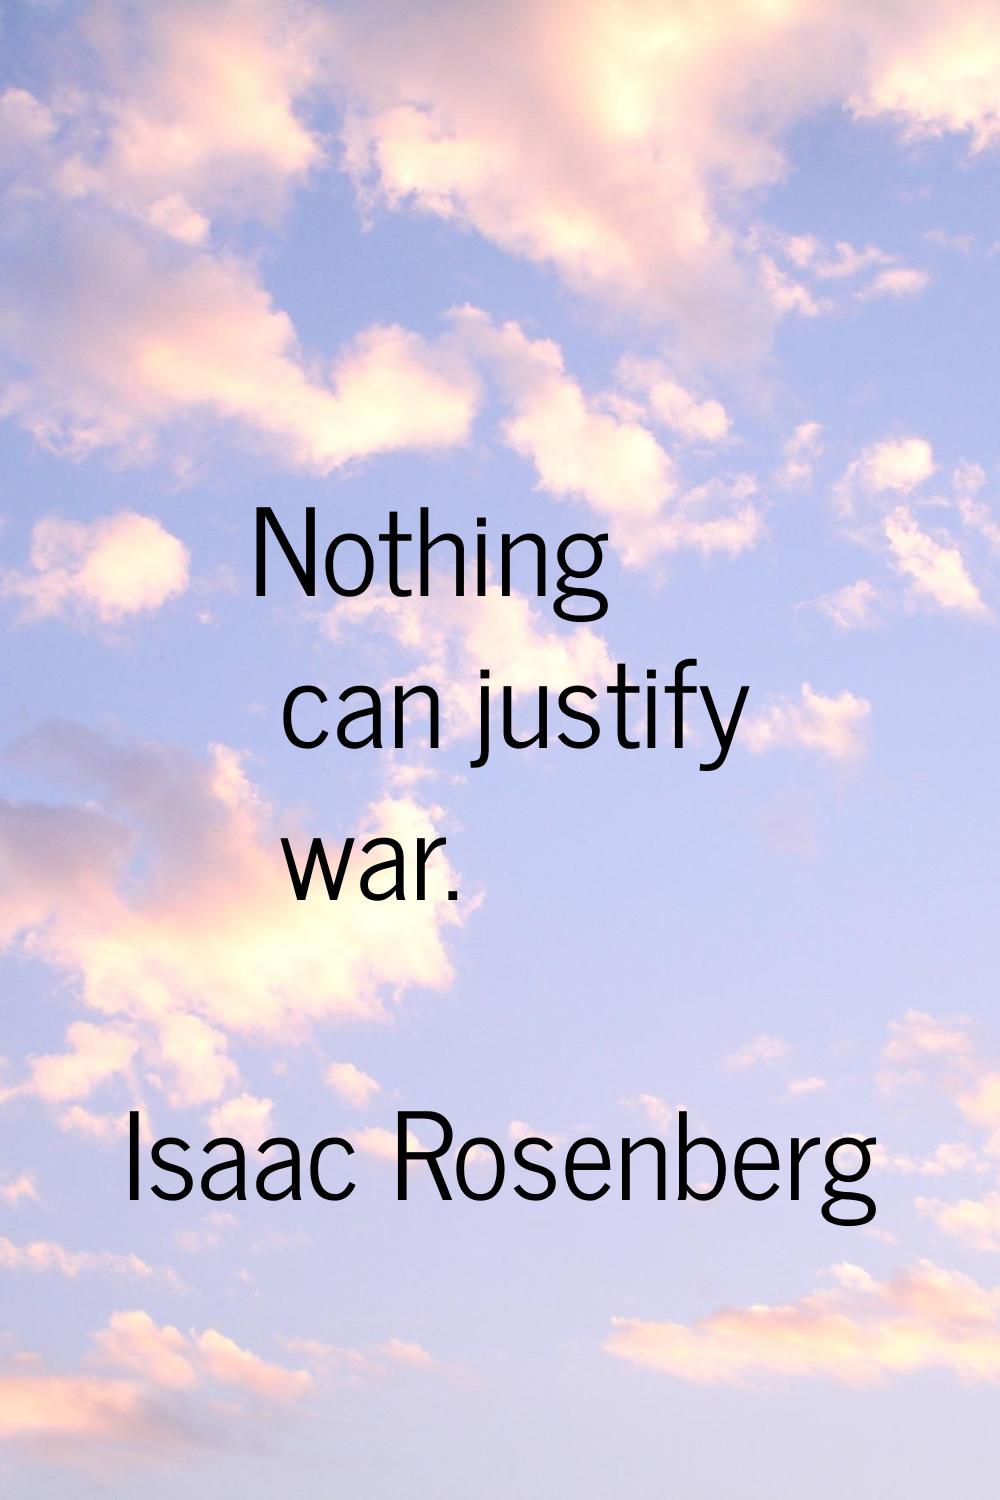 Nothing can justify war.